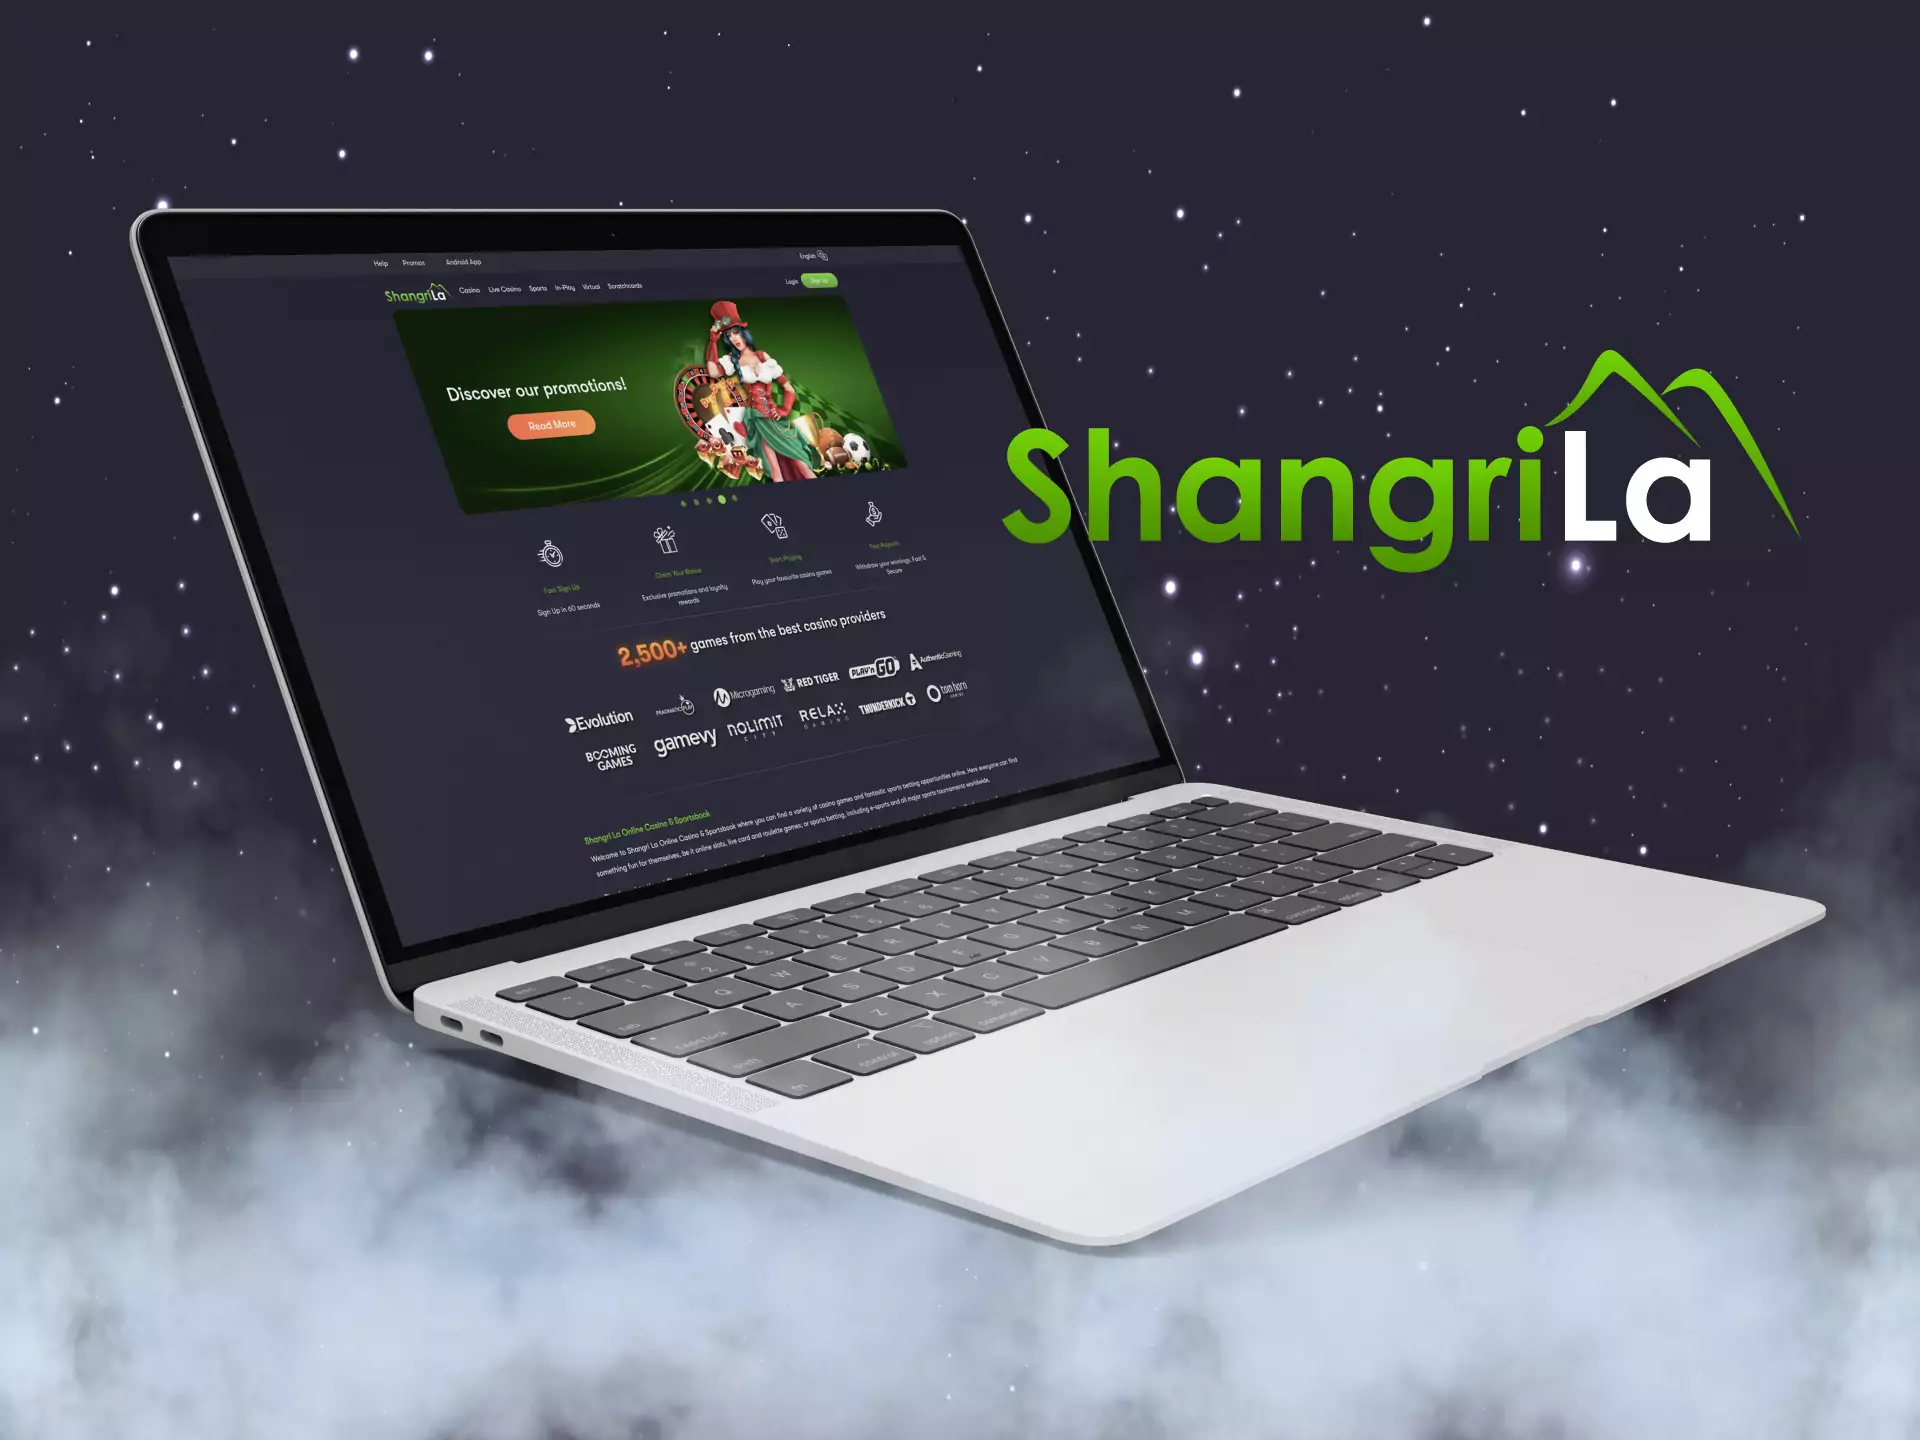 You can bet on Shangri La from your PC.